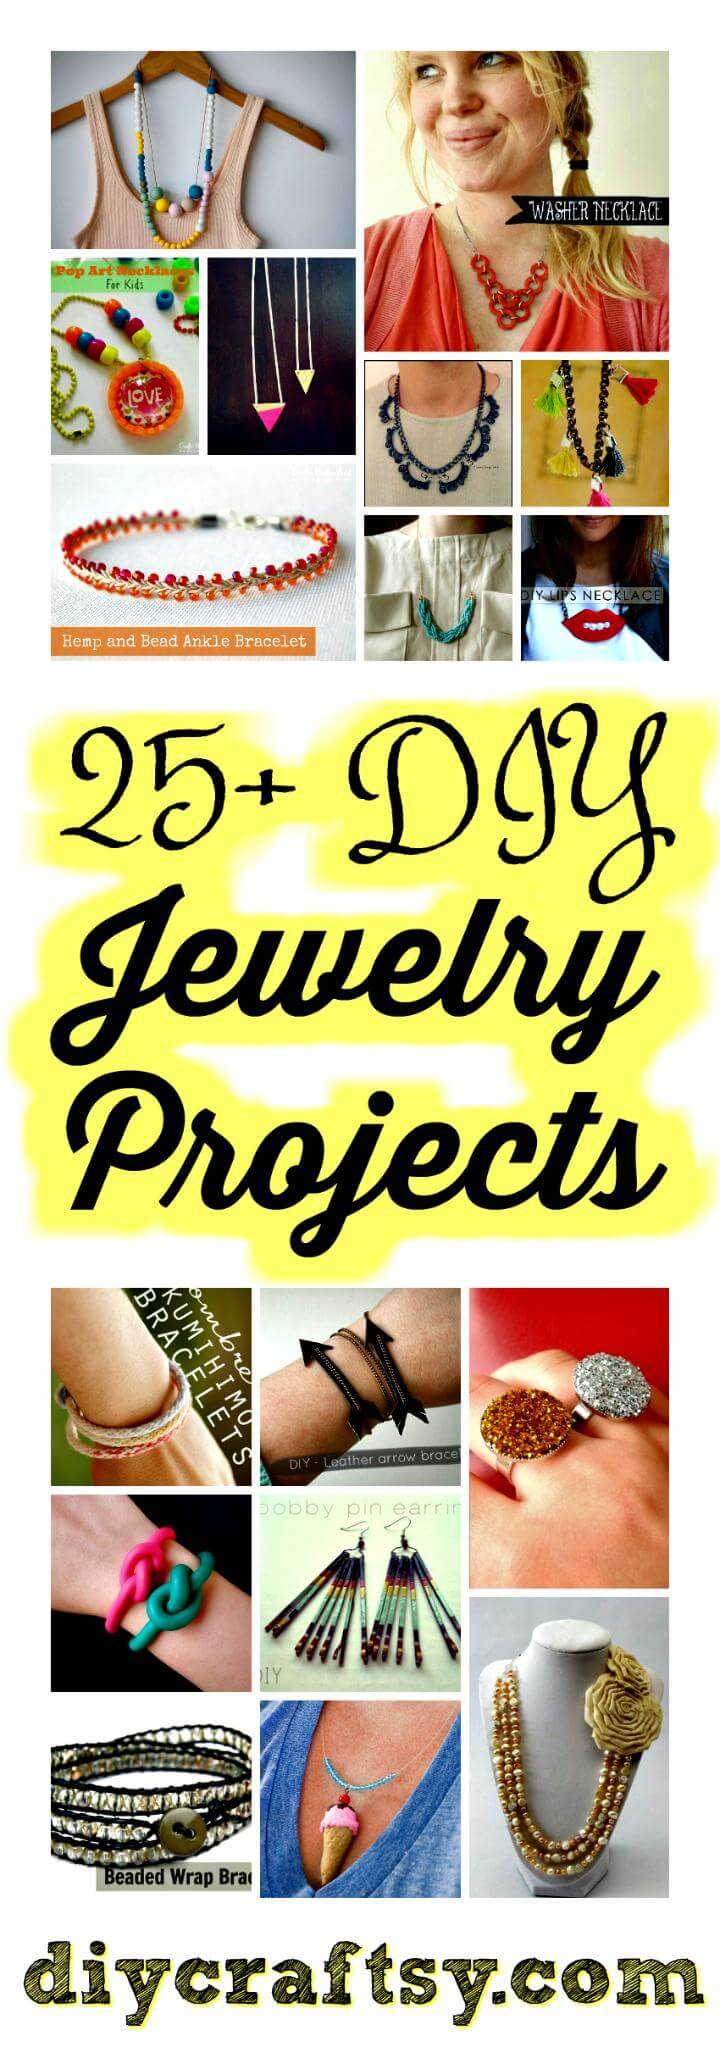 DIY Jewelry Projects